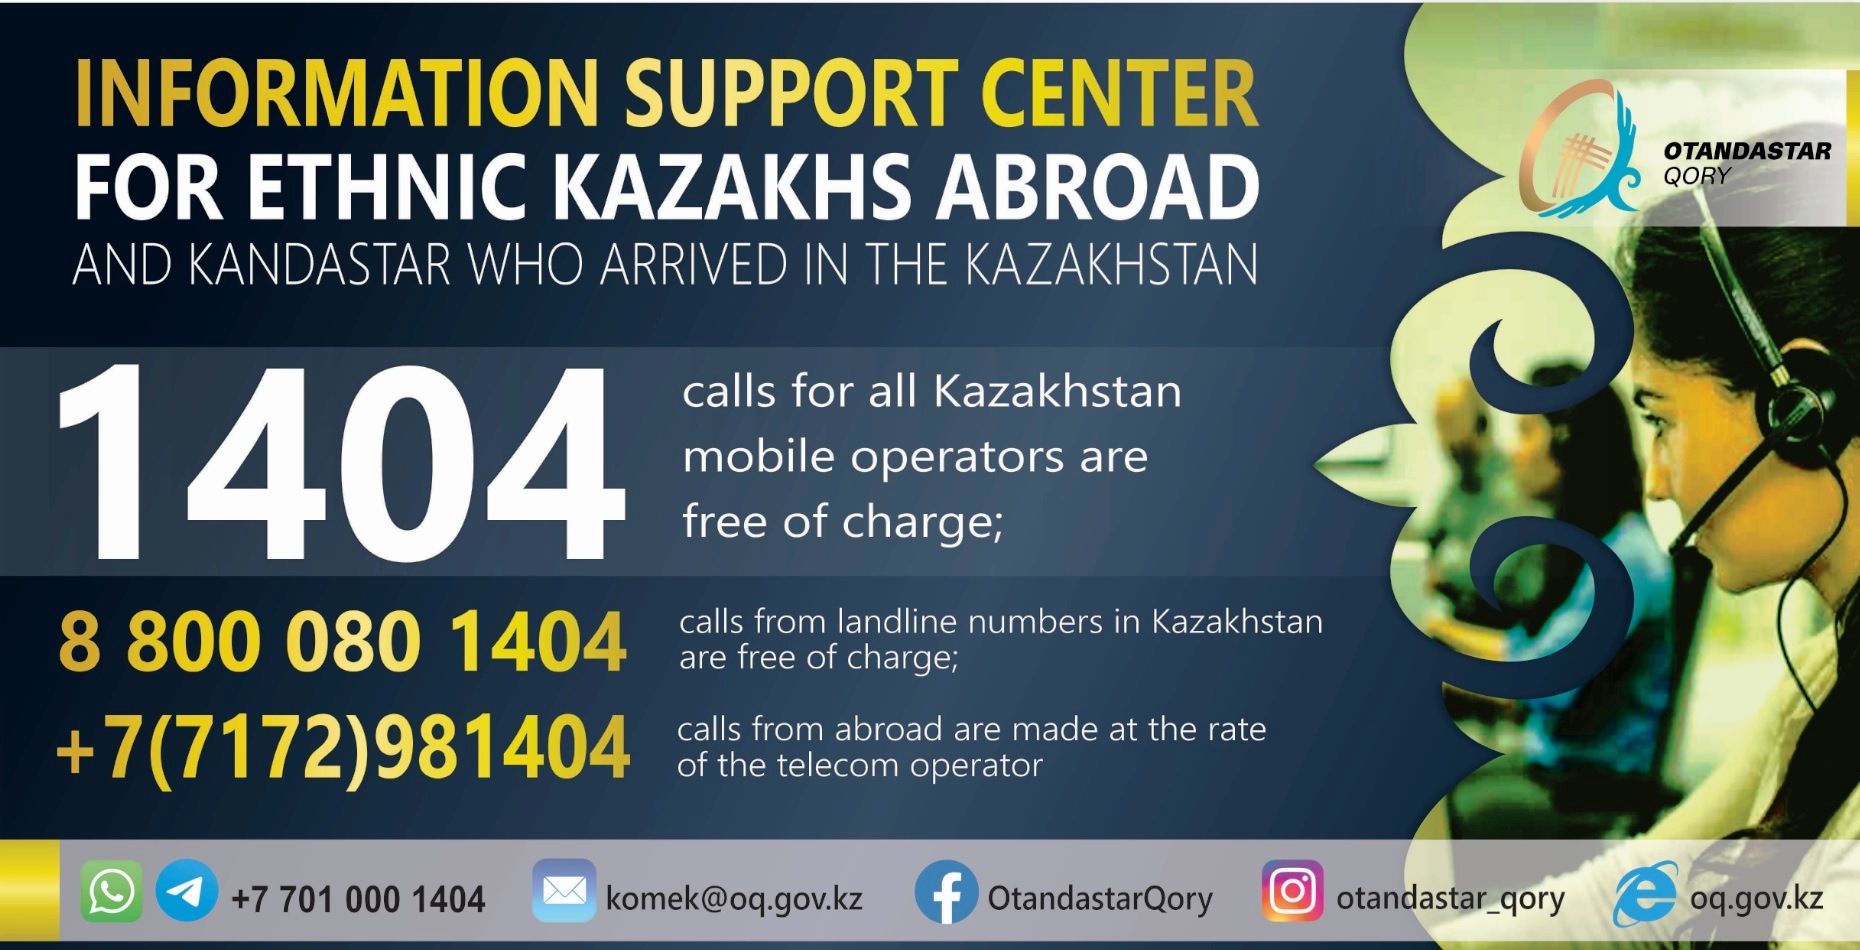 About the Information support center for ethnic Kazakhs abroad and kandastars who arrived in the Kazakhstan